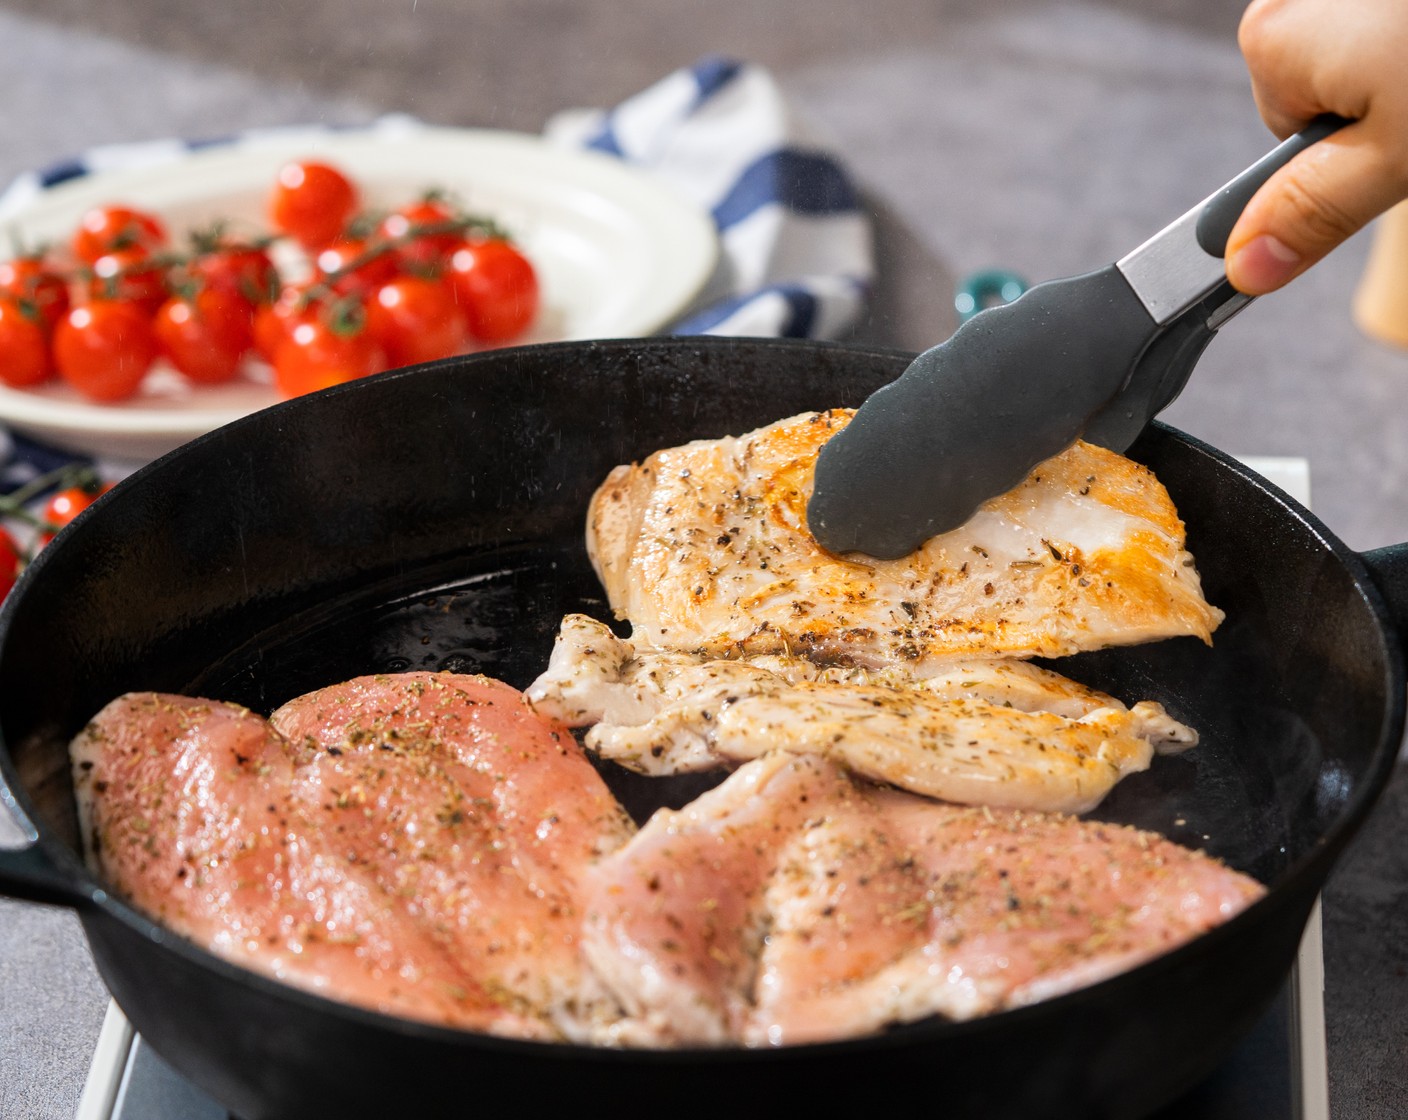 step 3 In a skillet, heat the Olive Oil (2 Tbsp) over medium-high heat. Once hot, add chicken to the skillet and cook for 2-3 minutes.